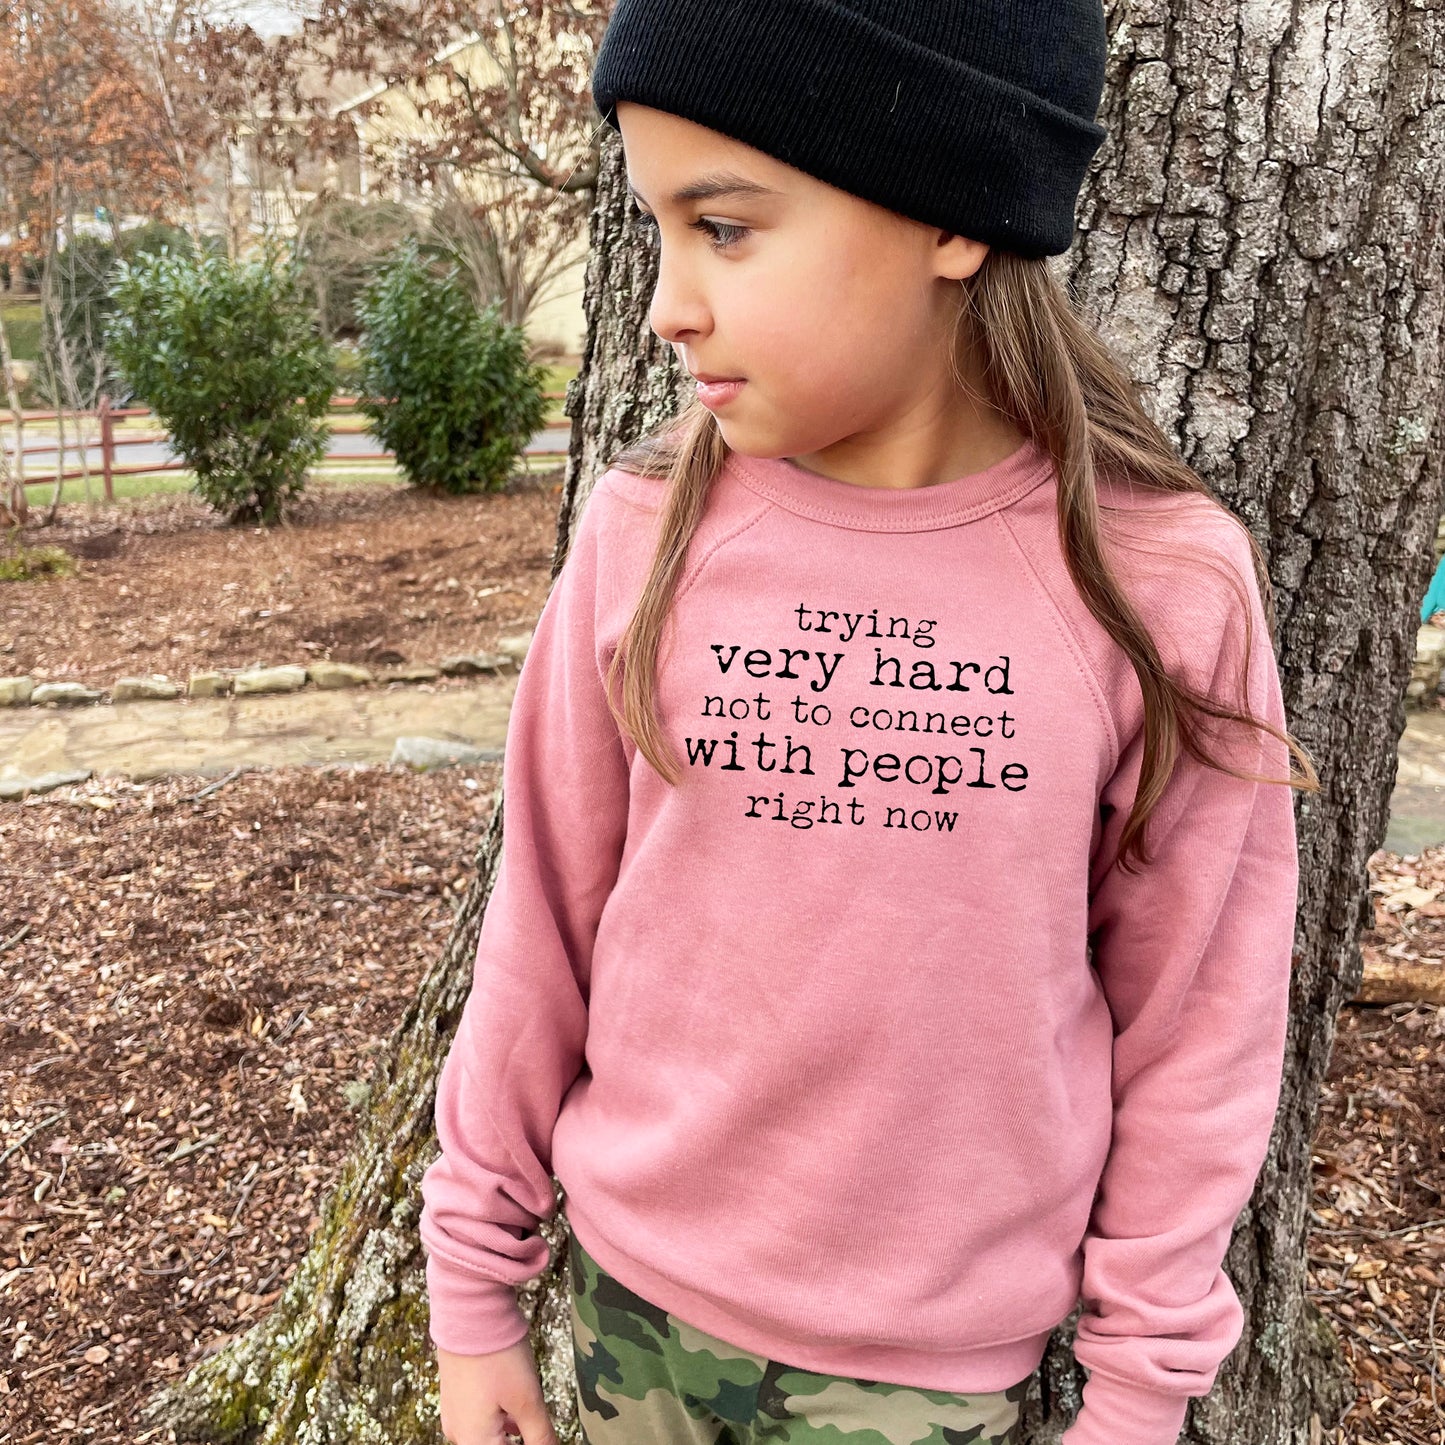 Trying Very Hard Not To Connect With People Right Now - Kid's Sweatshirt - Heather Gray or Mauve